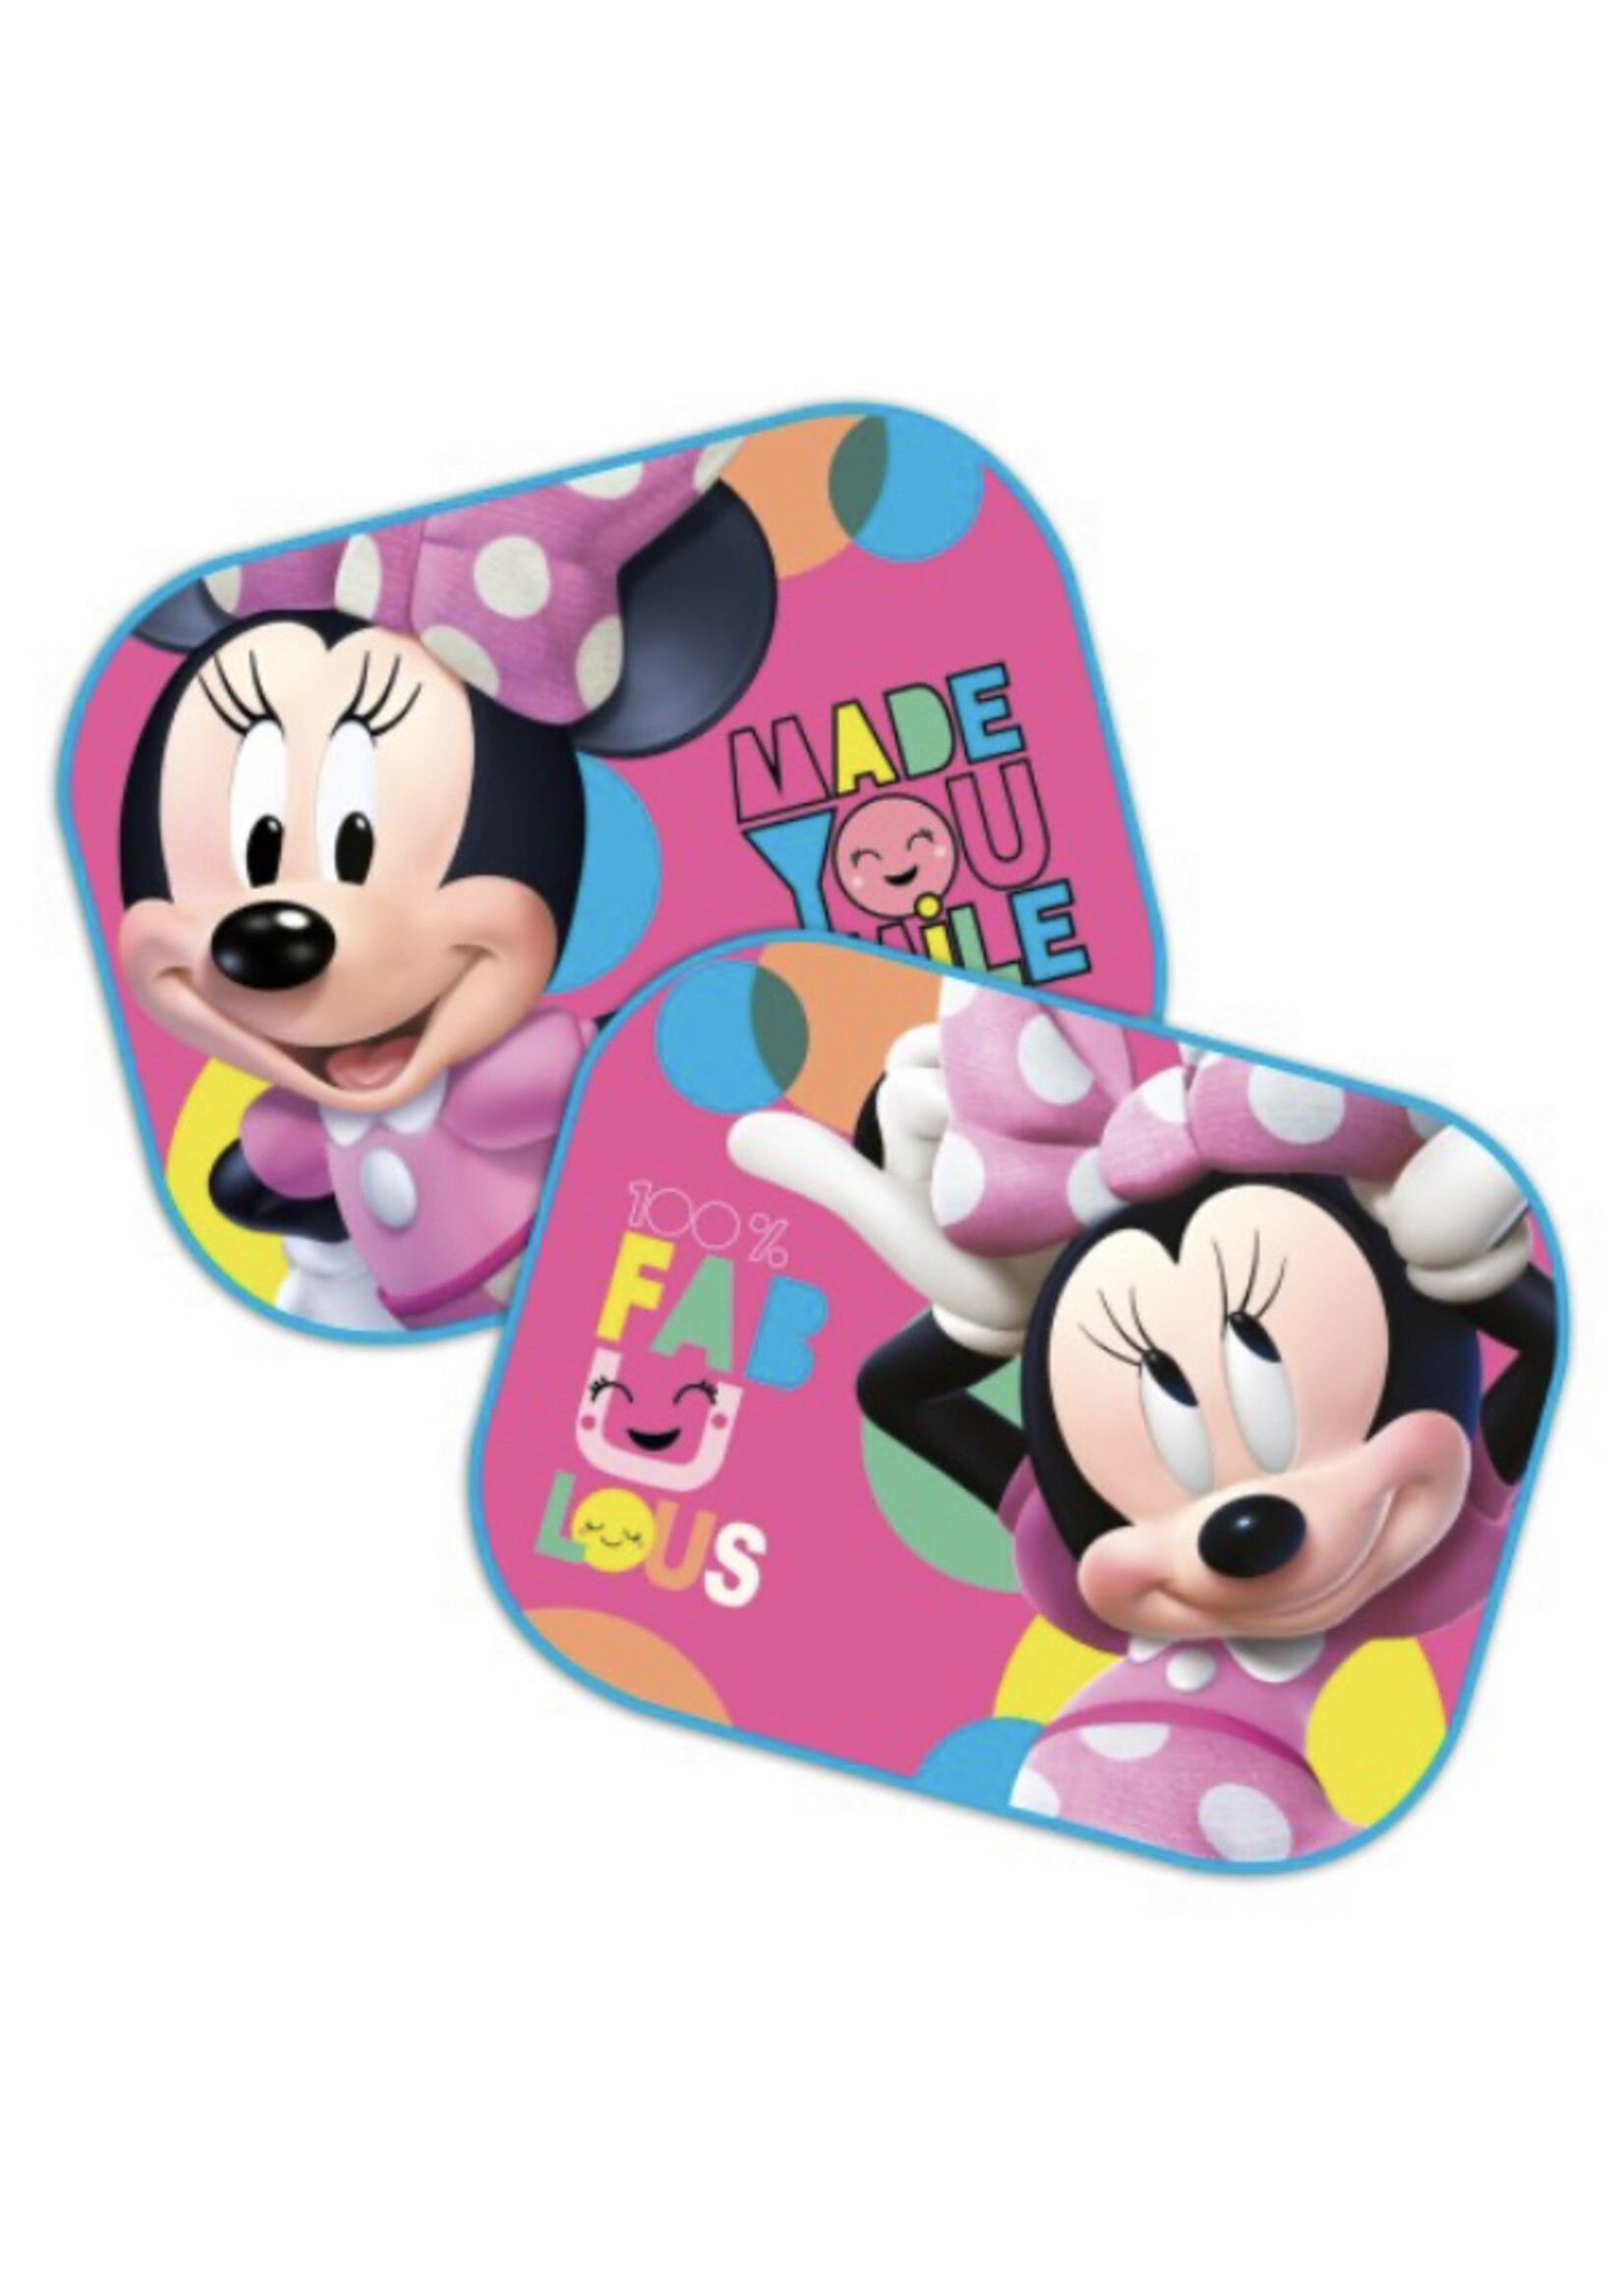 Disney Car sunshade Minnie Mouse from Disney pink